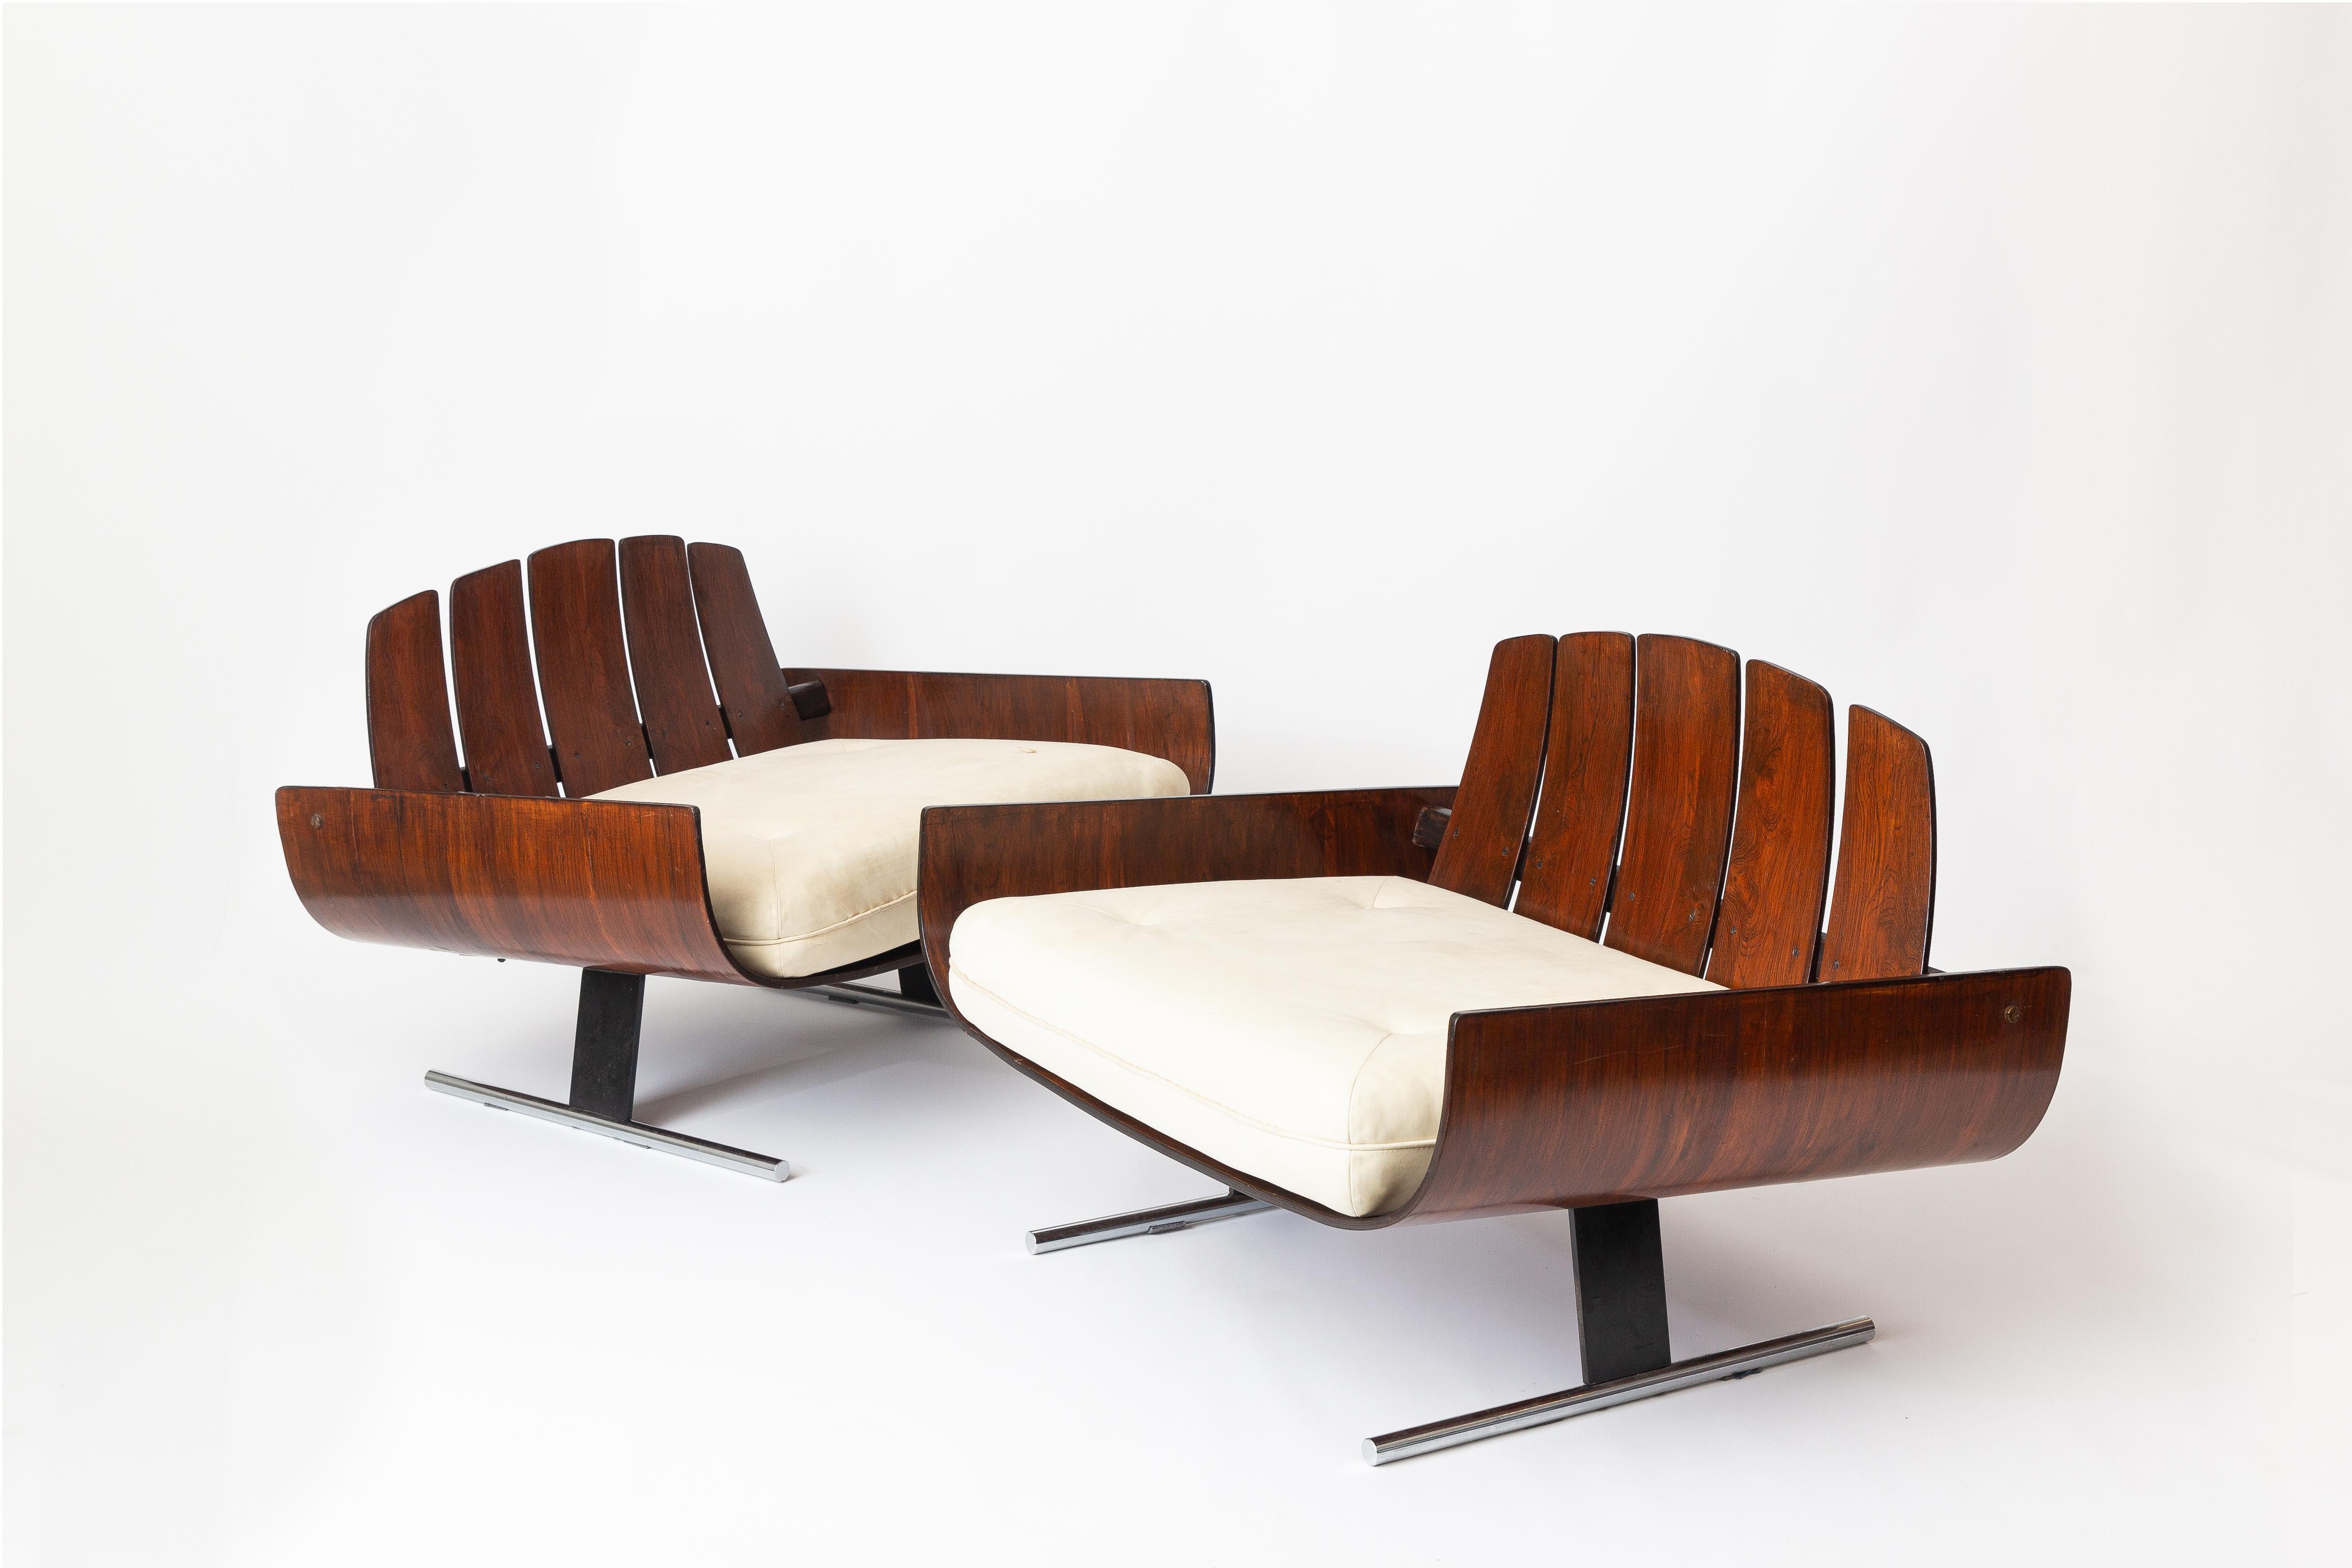 Beautiful pair of iconic Presidencial lounge armchairs by Brazilian design master Jorge Zalszupin. Produced in the 1960's, these uniquely shaped chairs feature a curved wood bottom, slatted back, and long metal feet. The contrast of shapes and